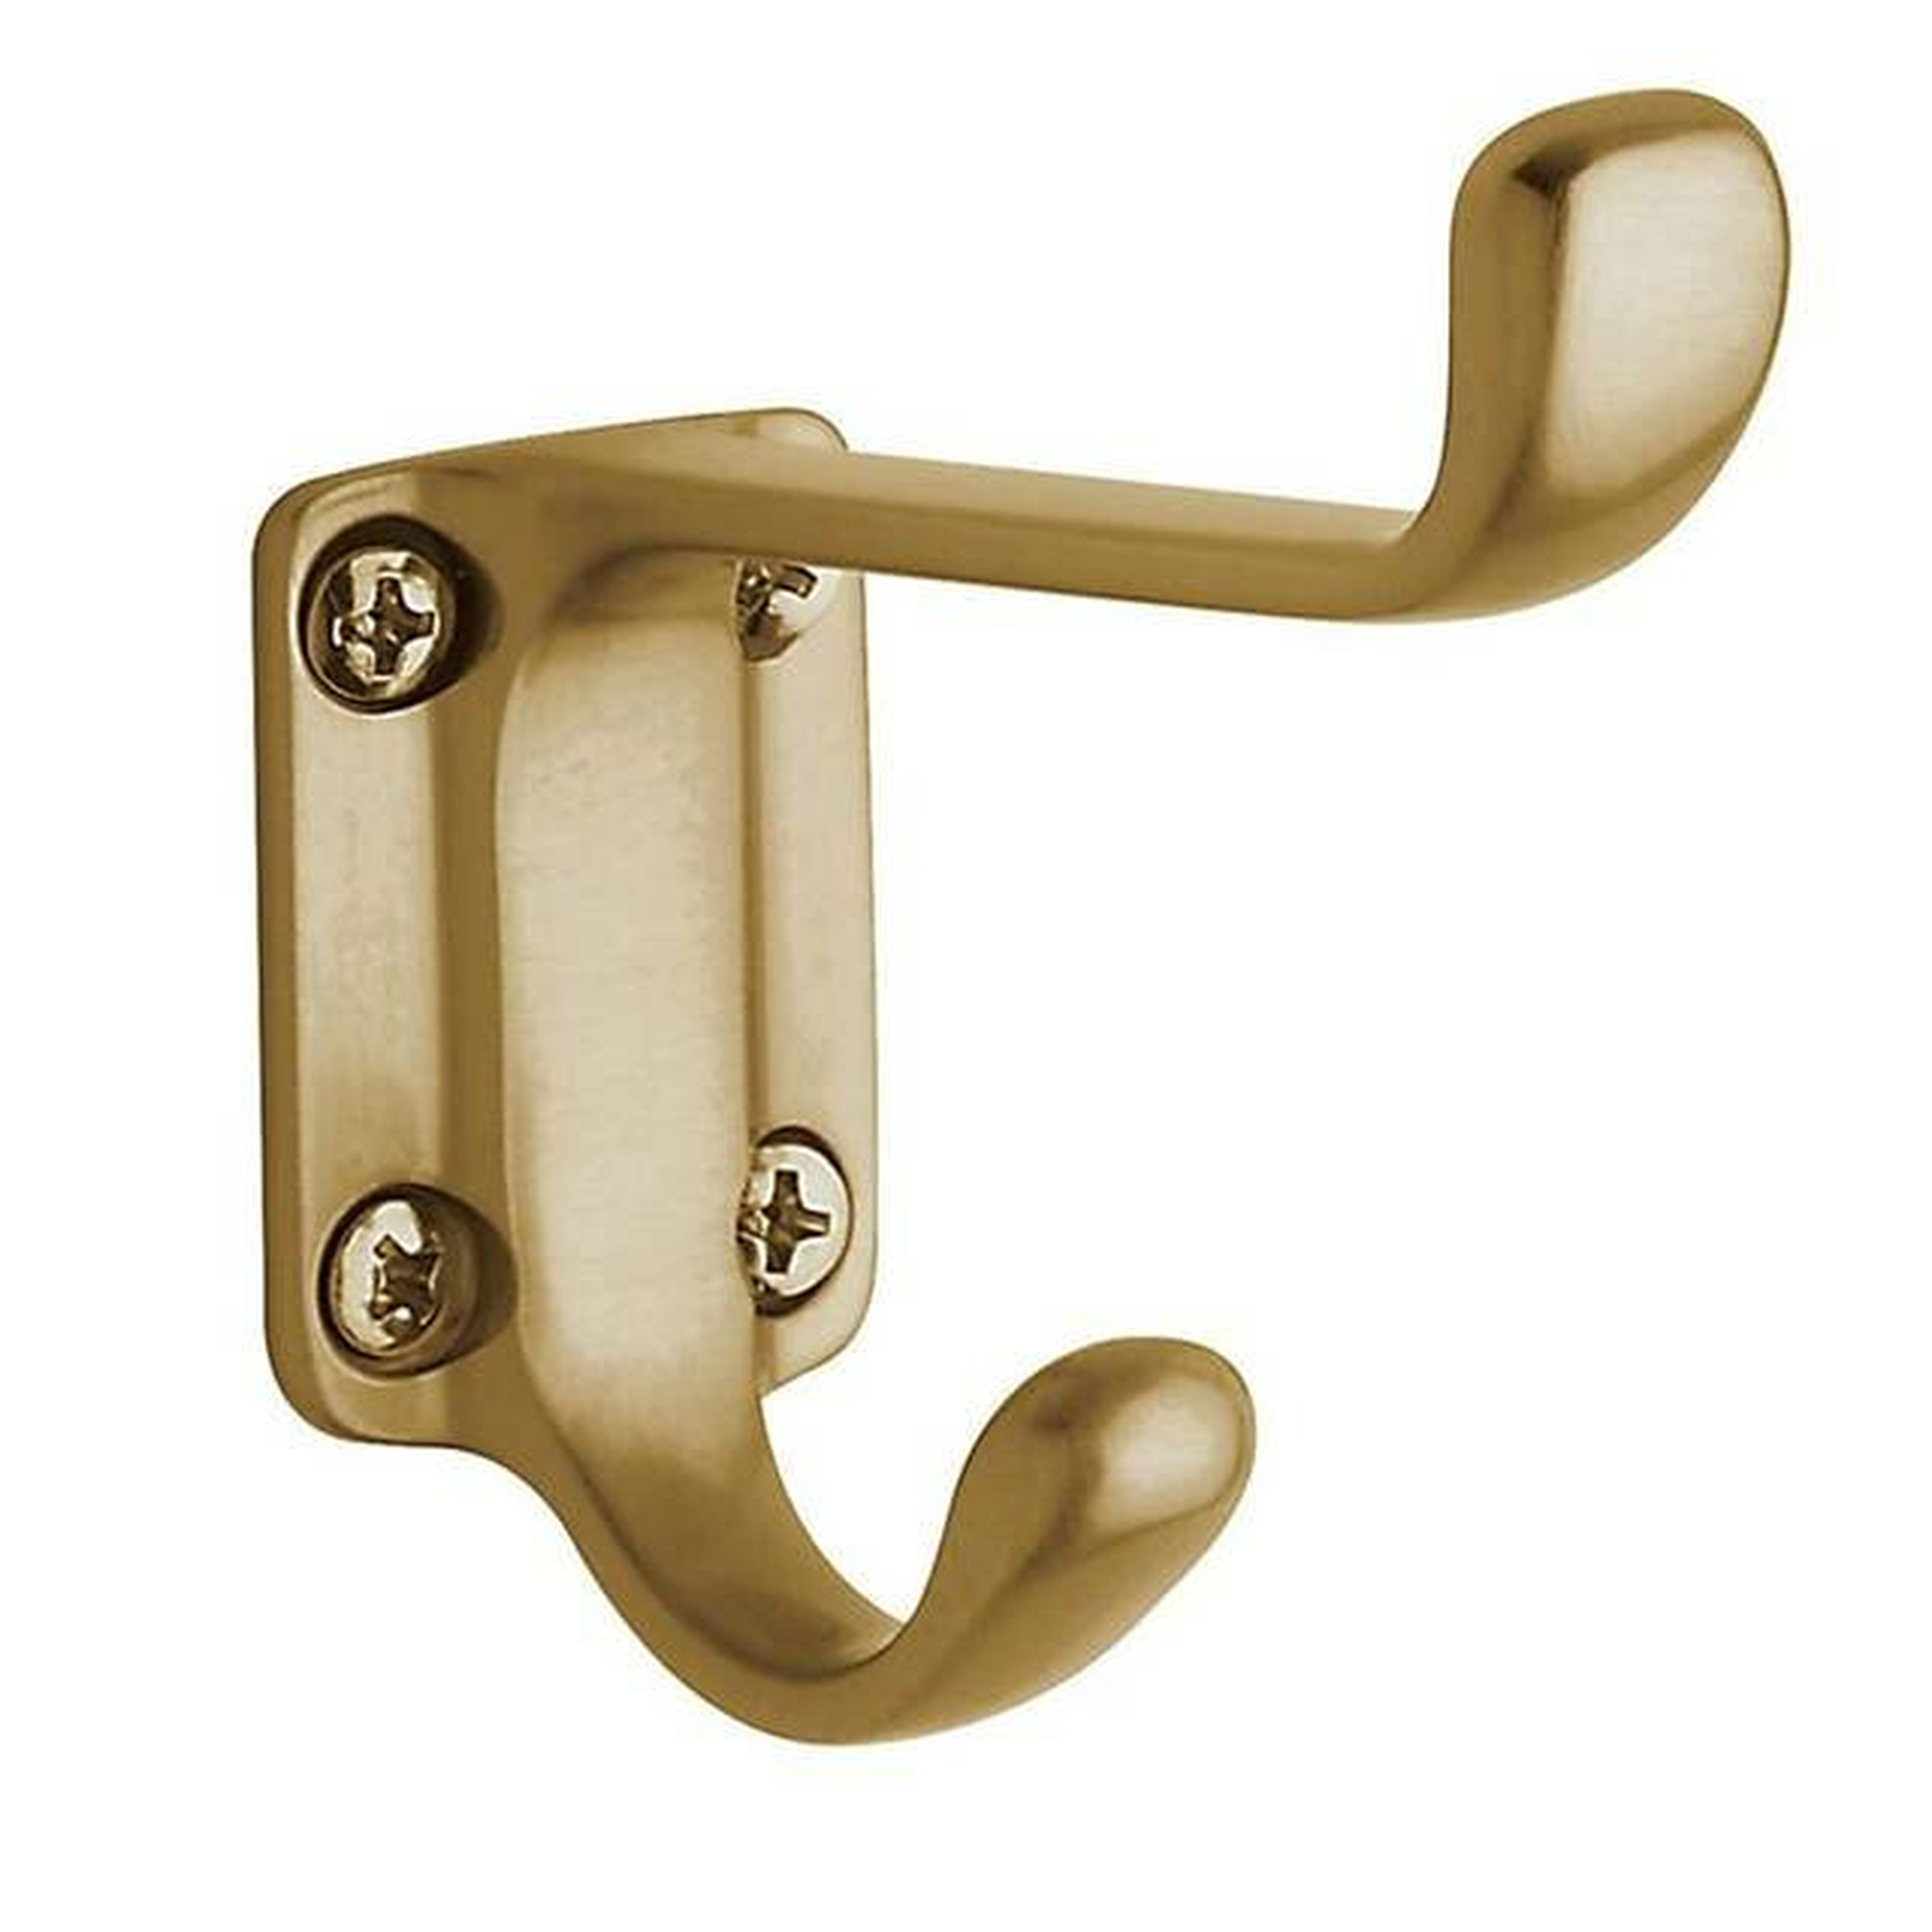 Costume Wall Hook Color: Vintage Brass - Perigold